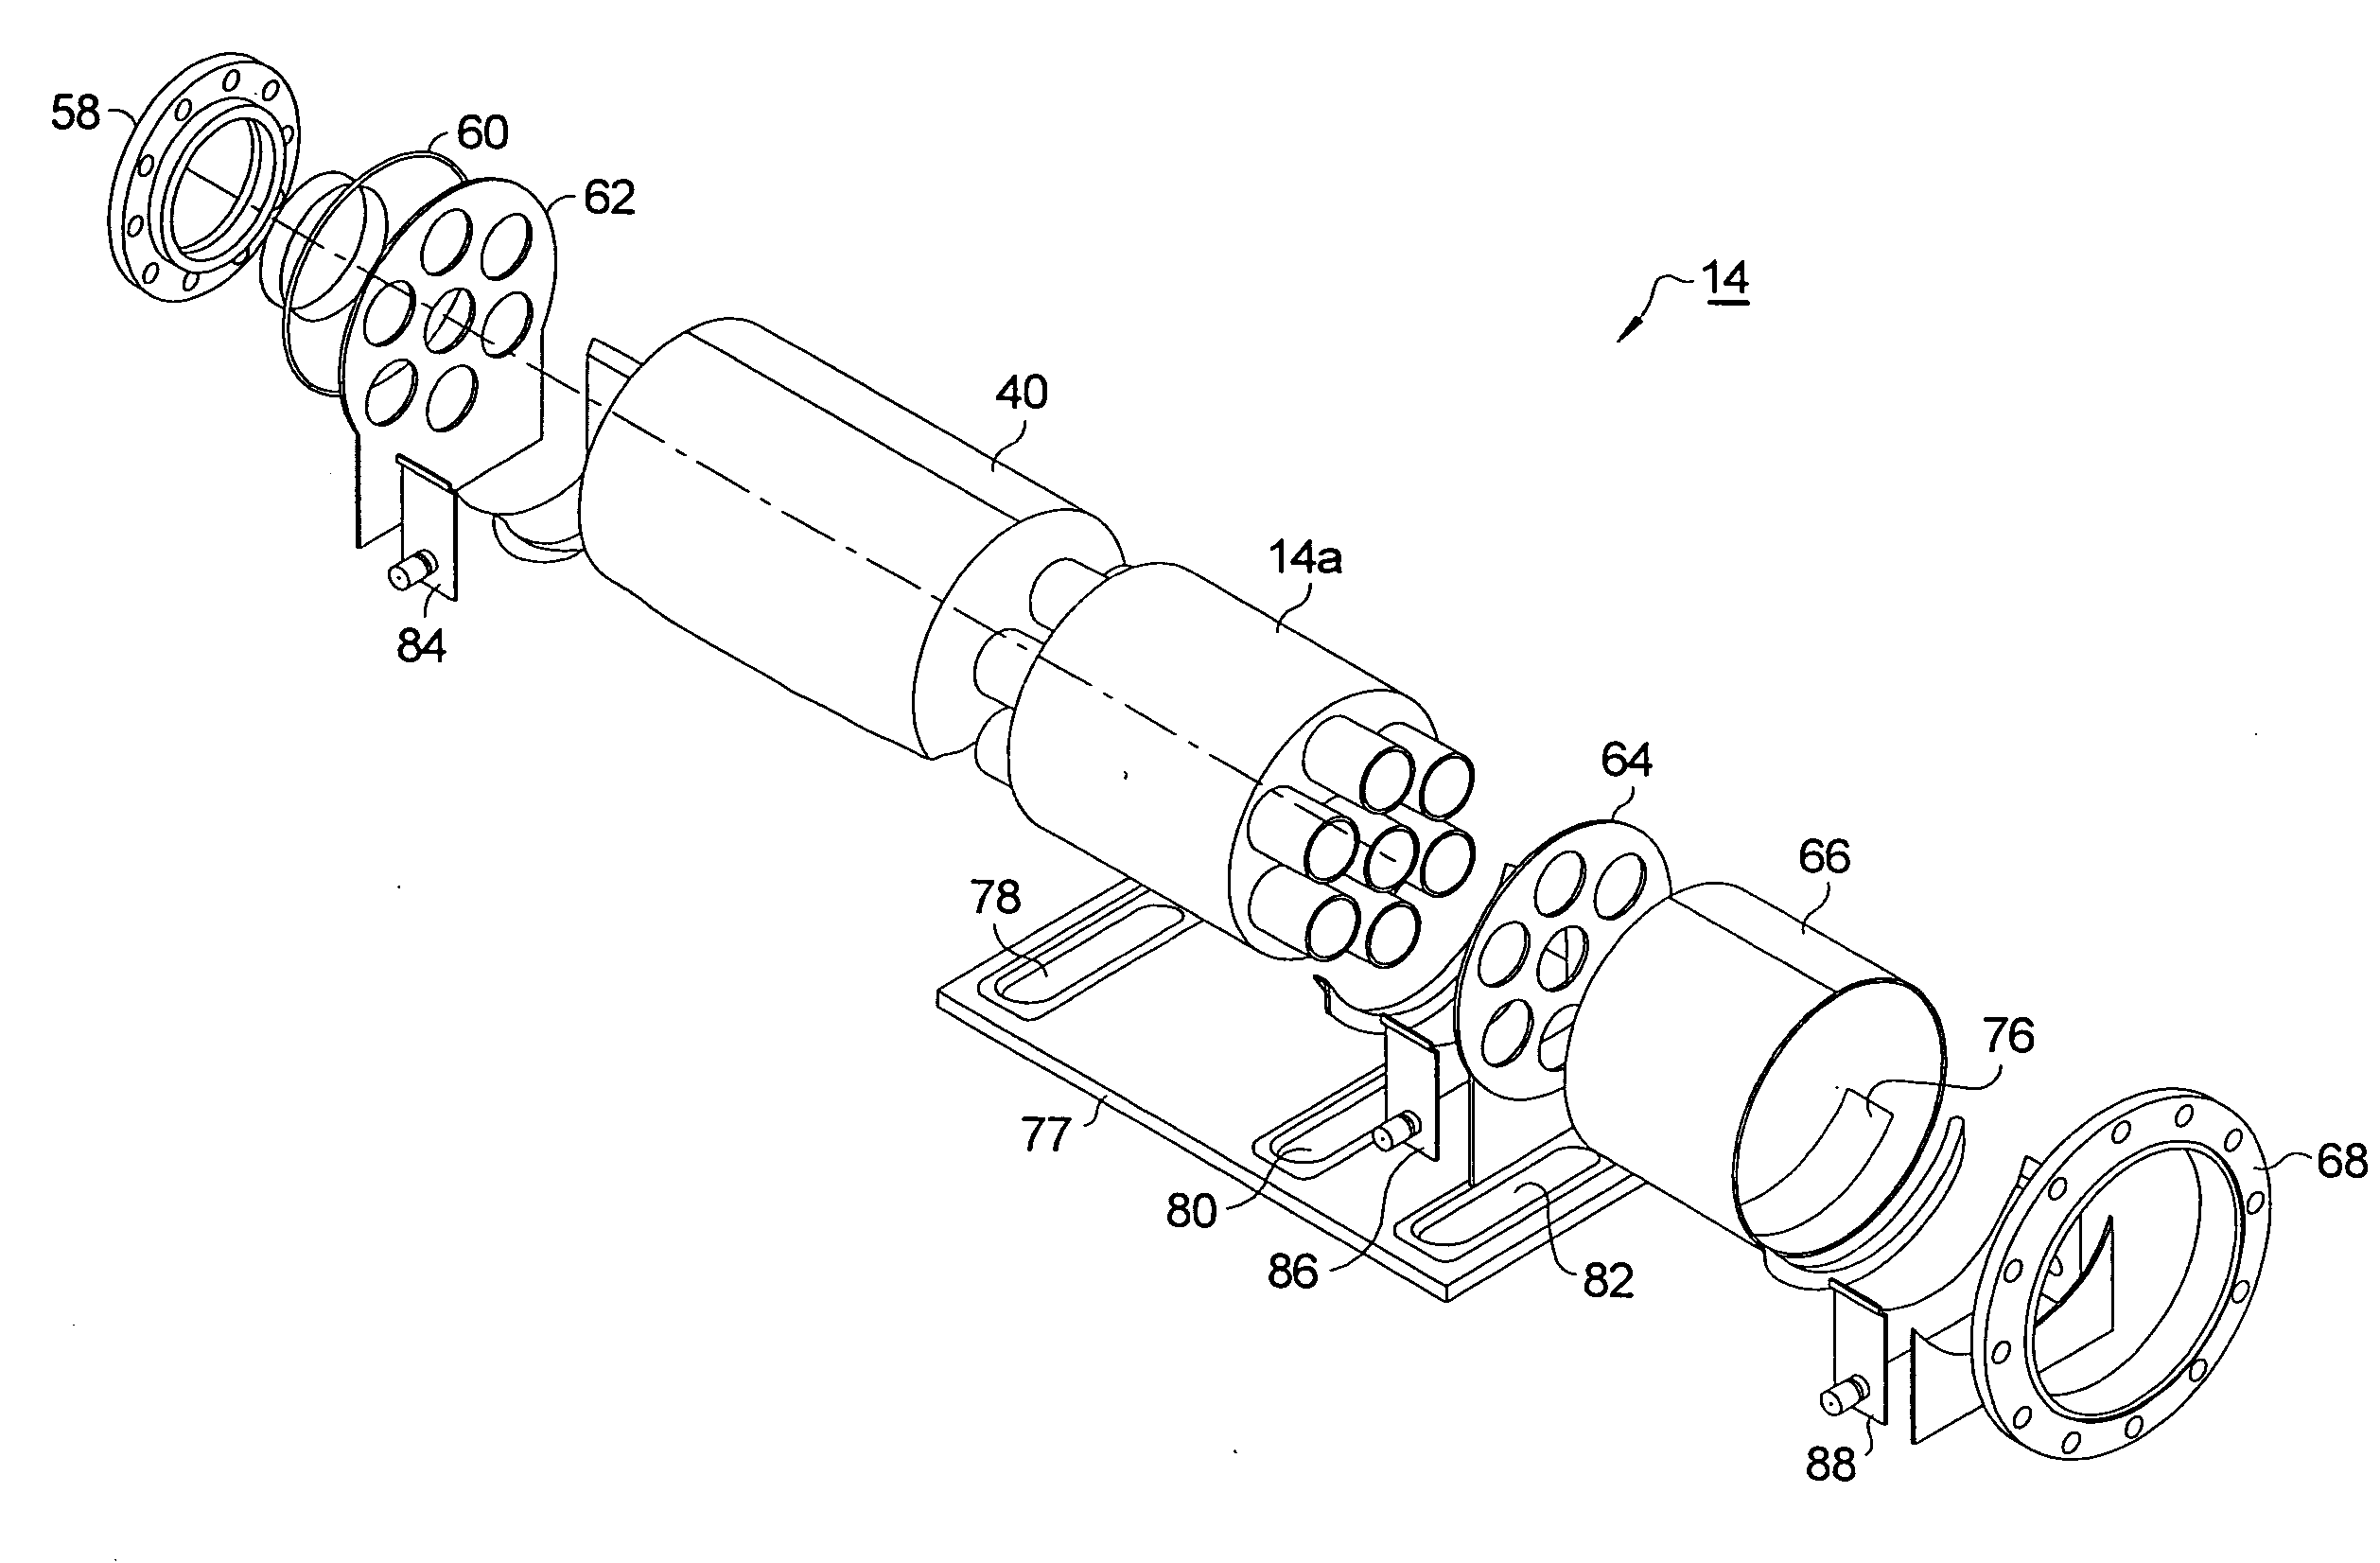 Multi-tube fuel reformer with augmented heat transfer